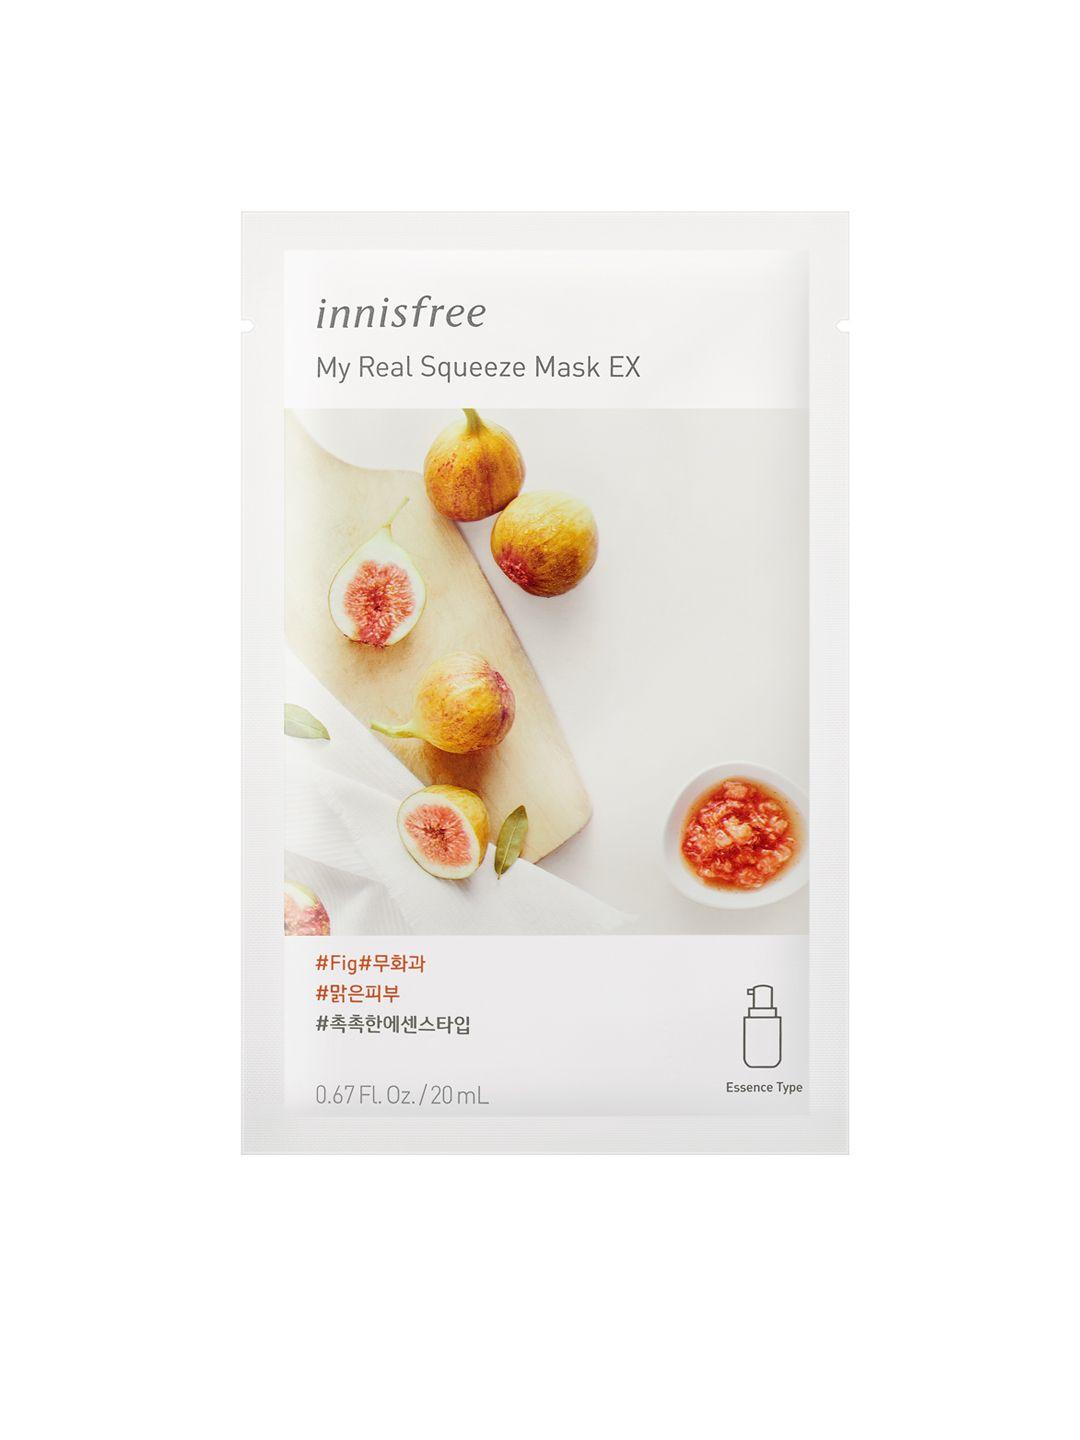 innisfree-unisex-my-real-squeeze-fig-mask-ex